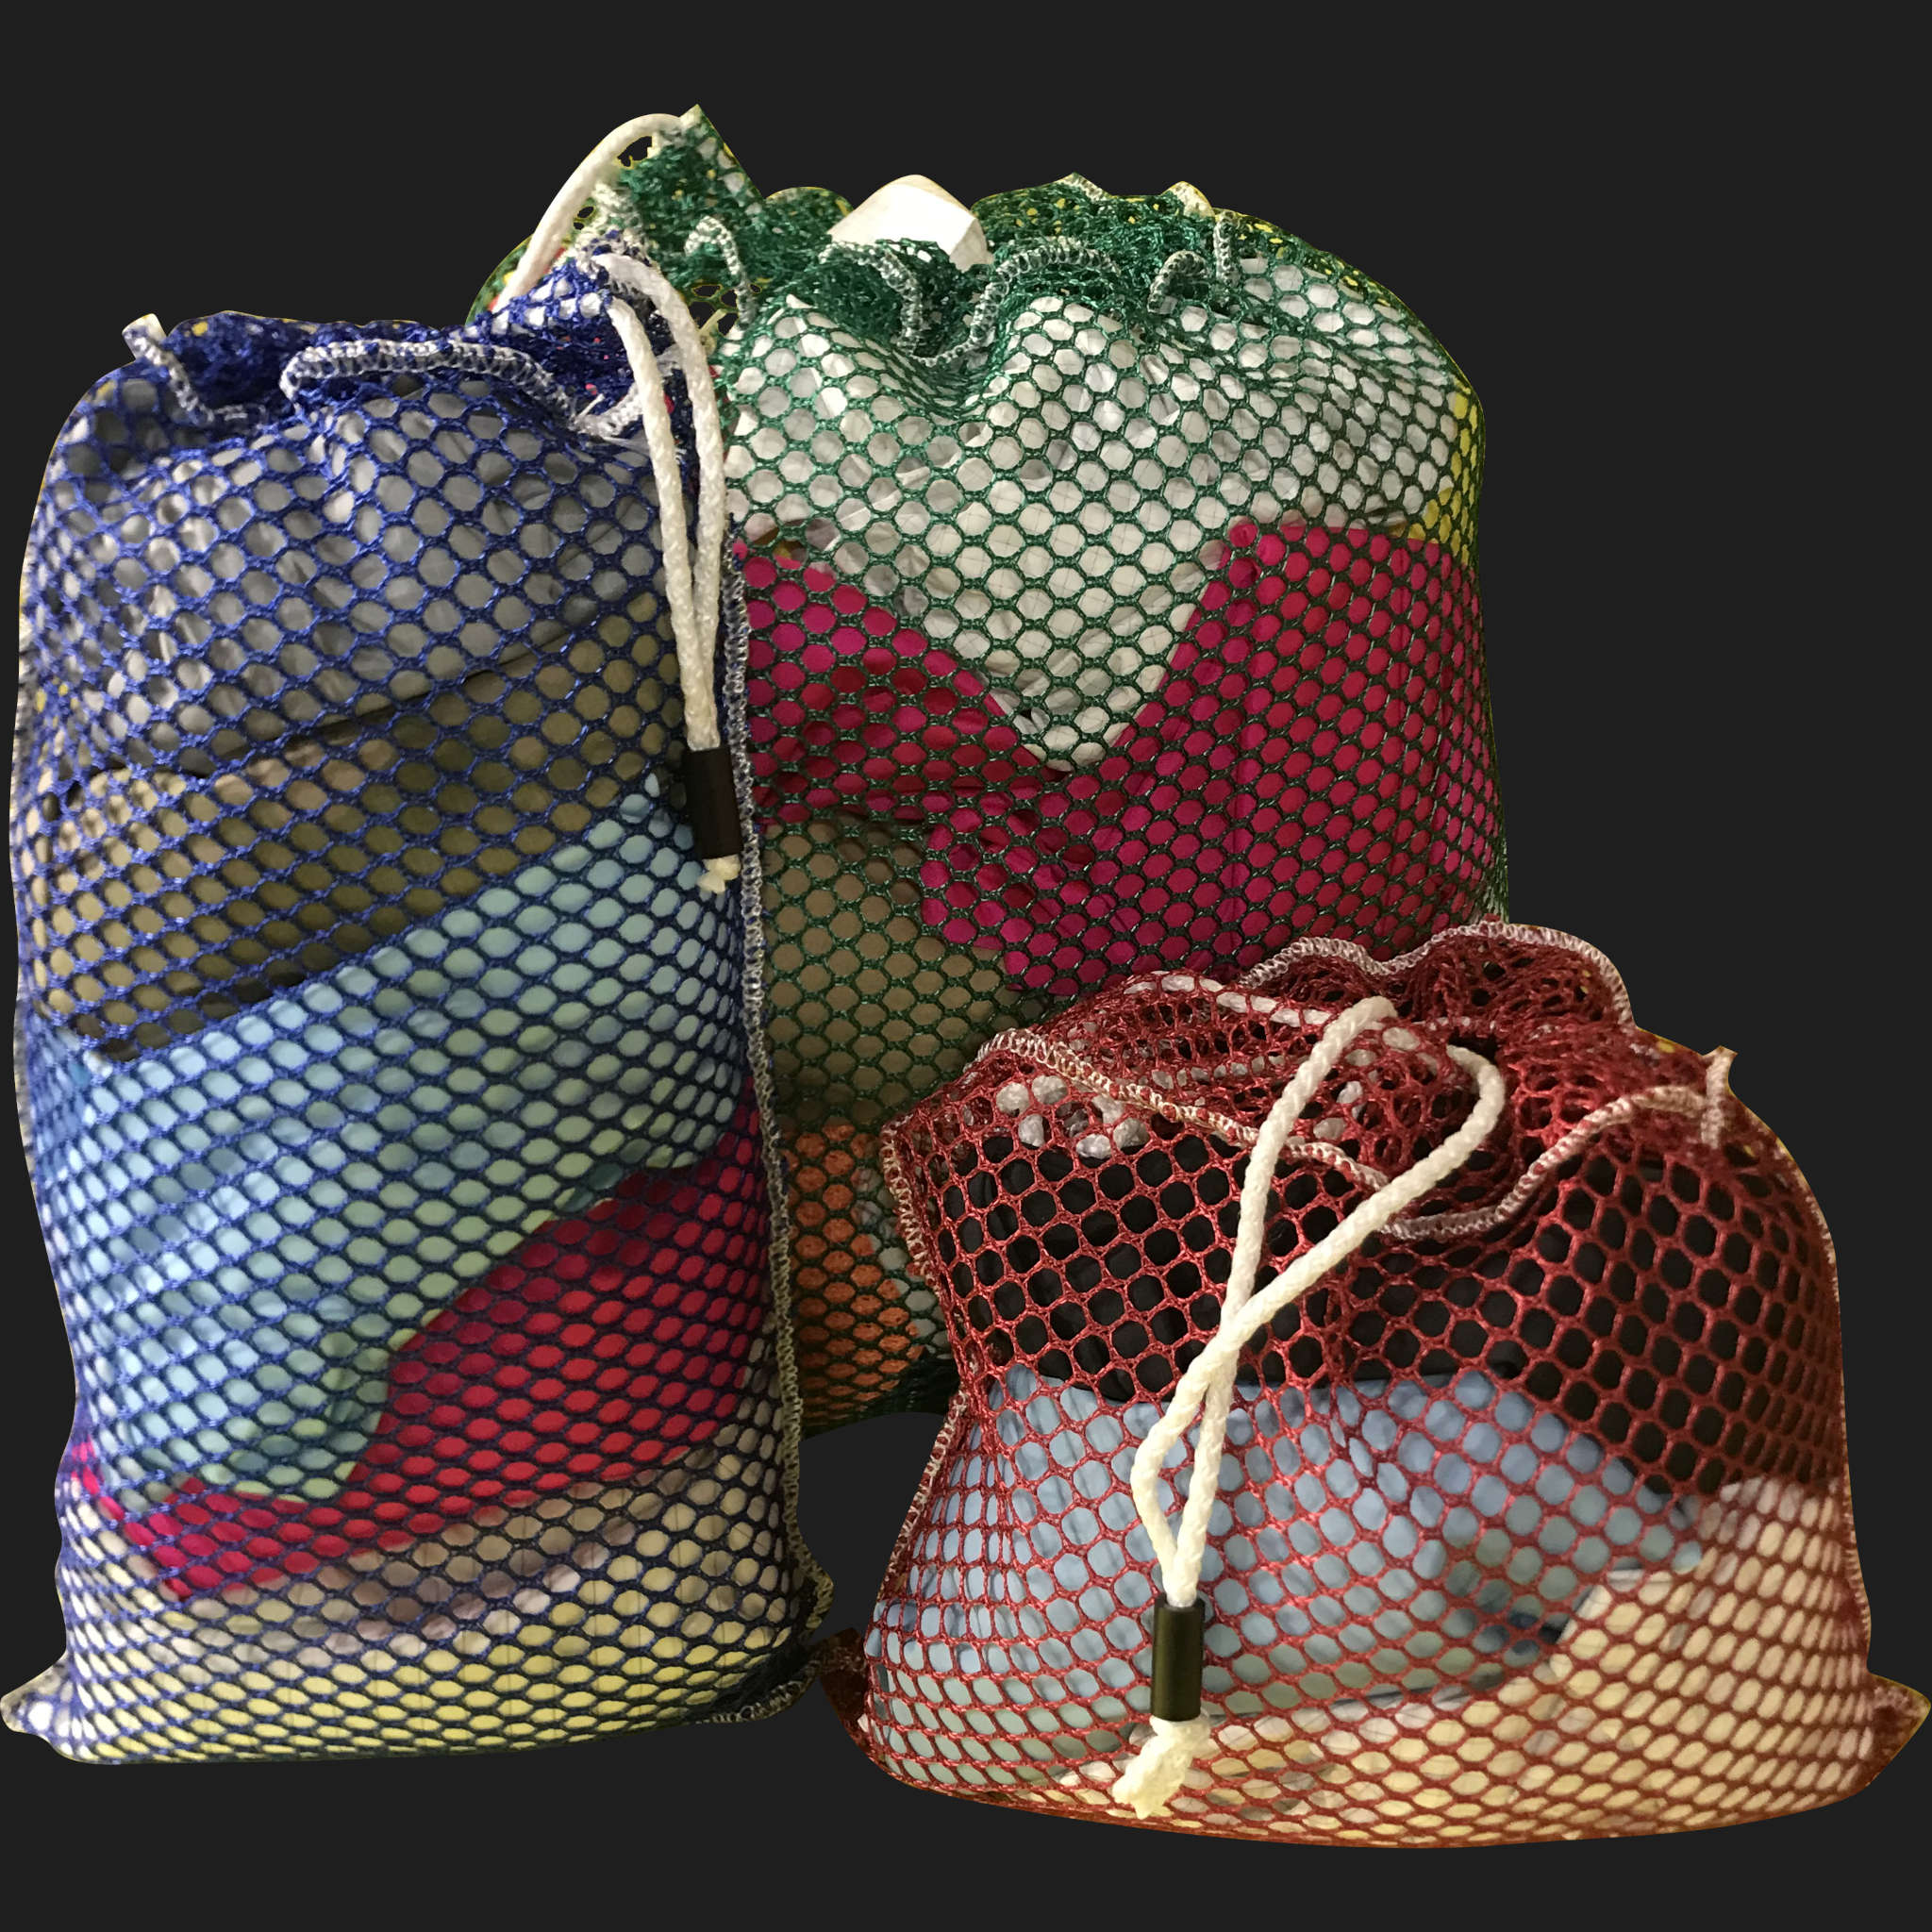 42" x 58" Customized Mesh-Net-Laundry Bags Heavy Duty with Cord and barrellock closure